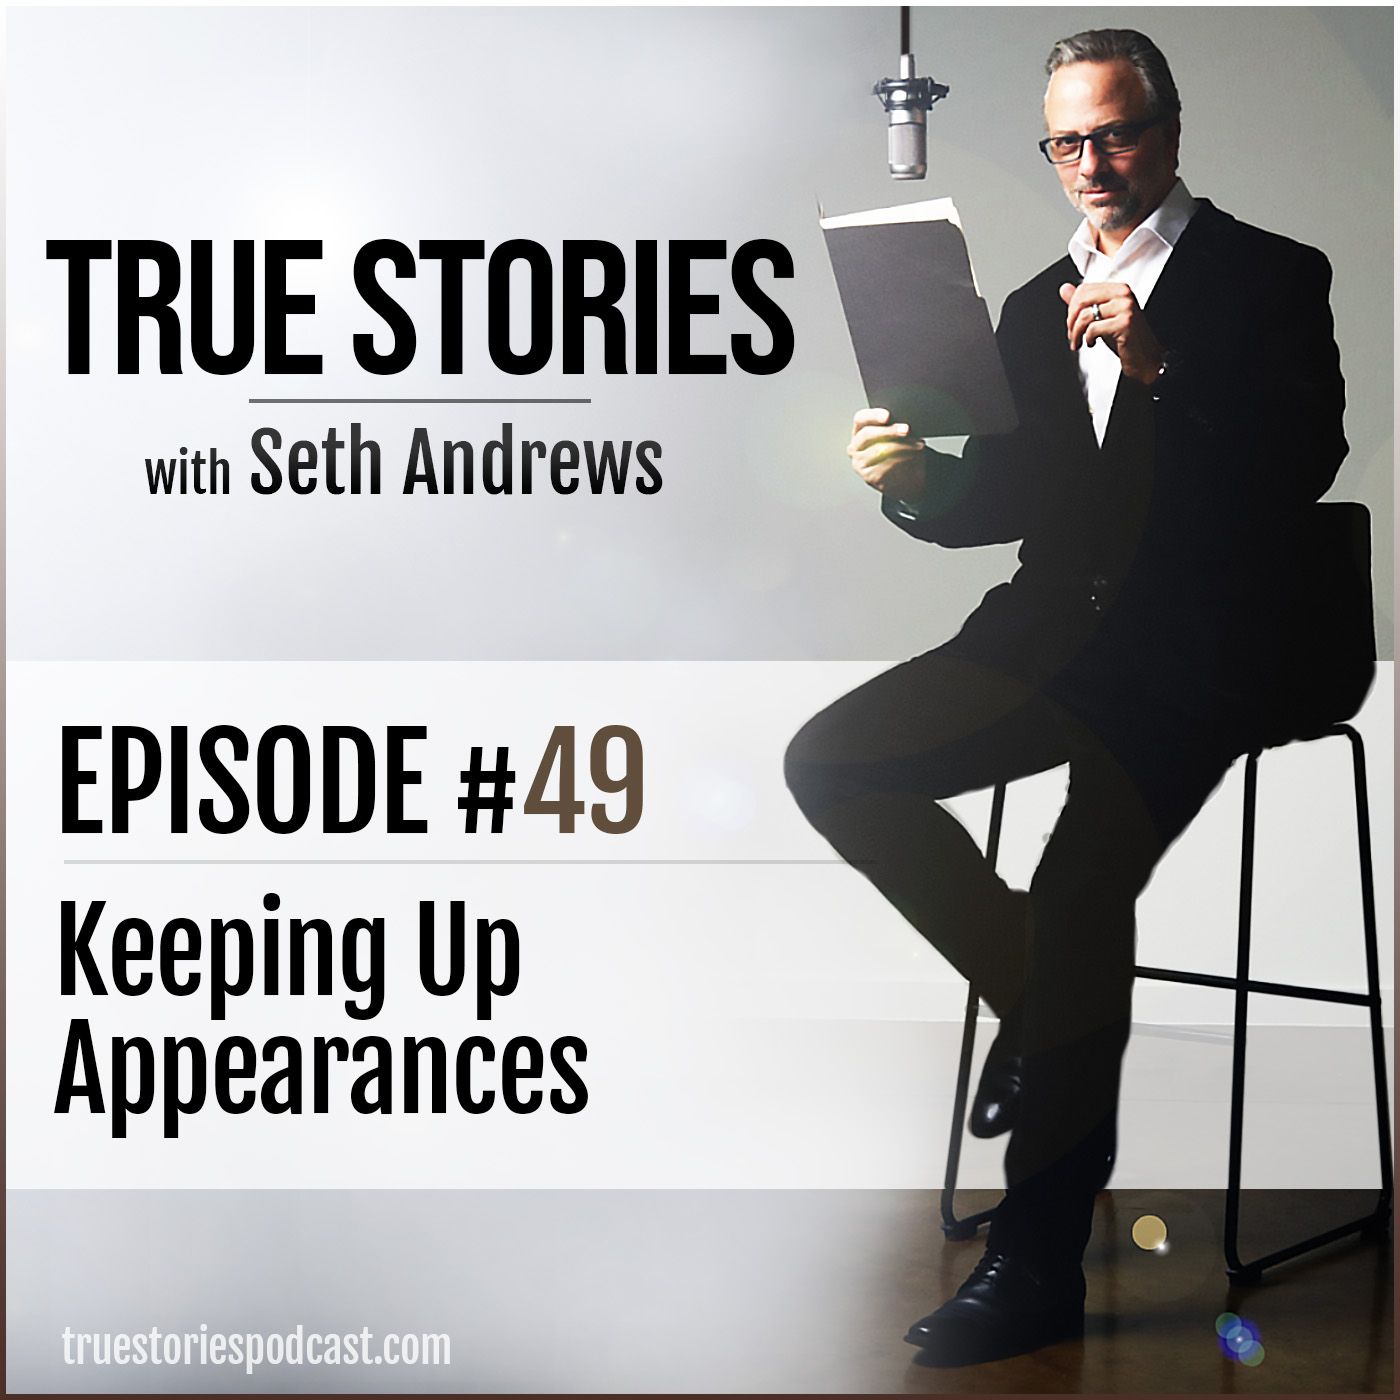 True Stories #49 - Keeping Up Appearances